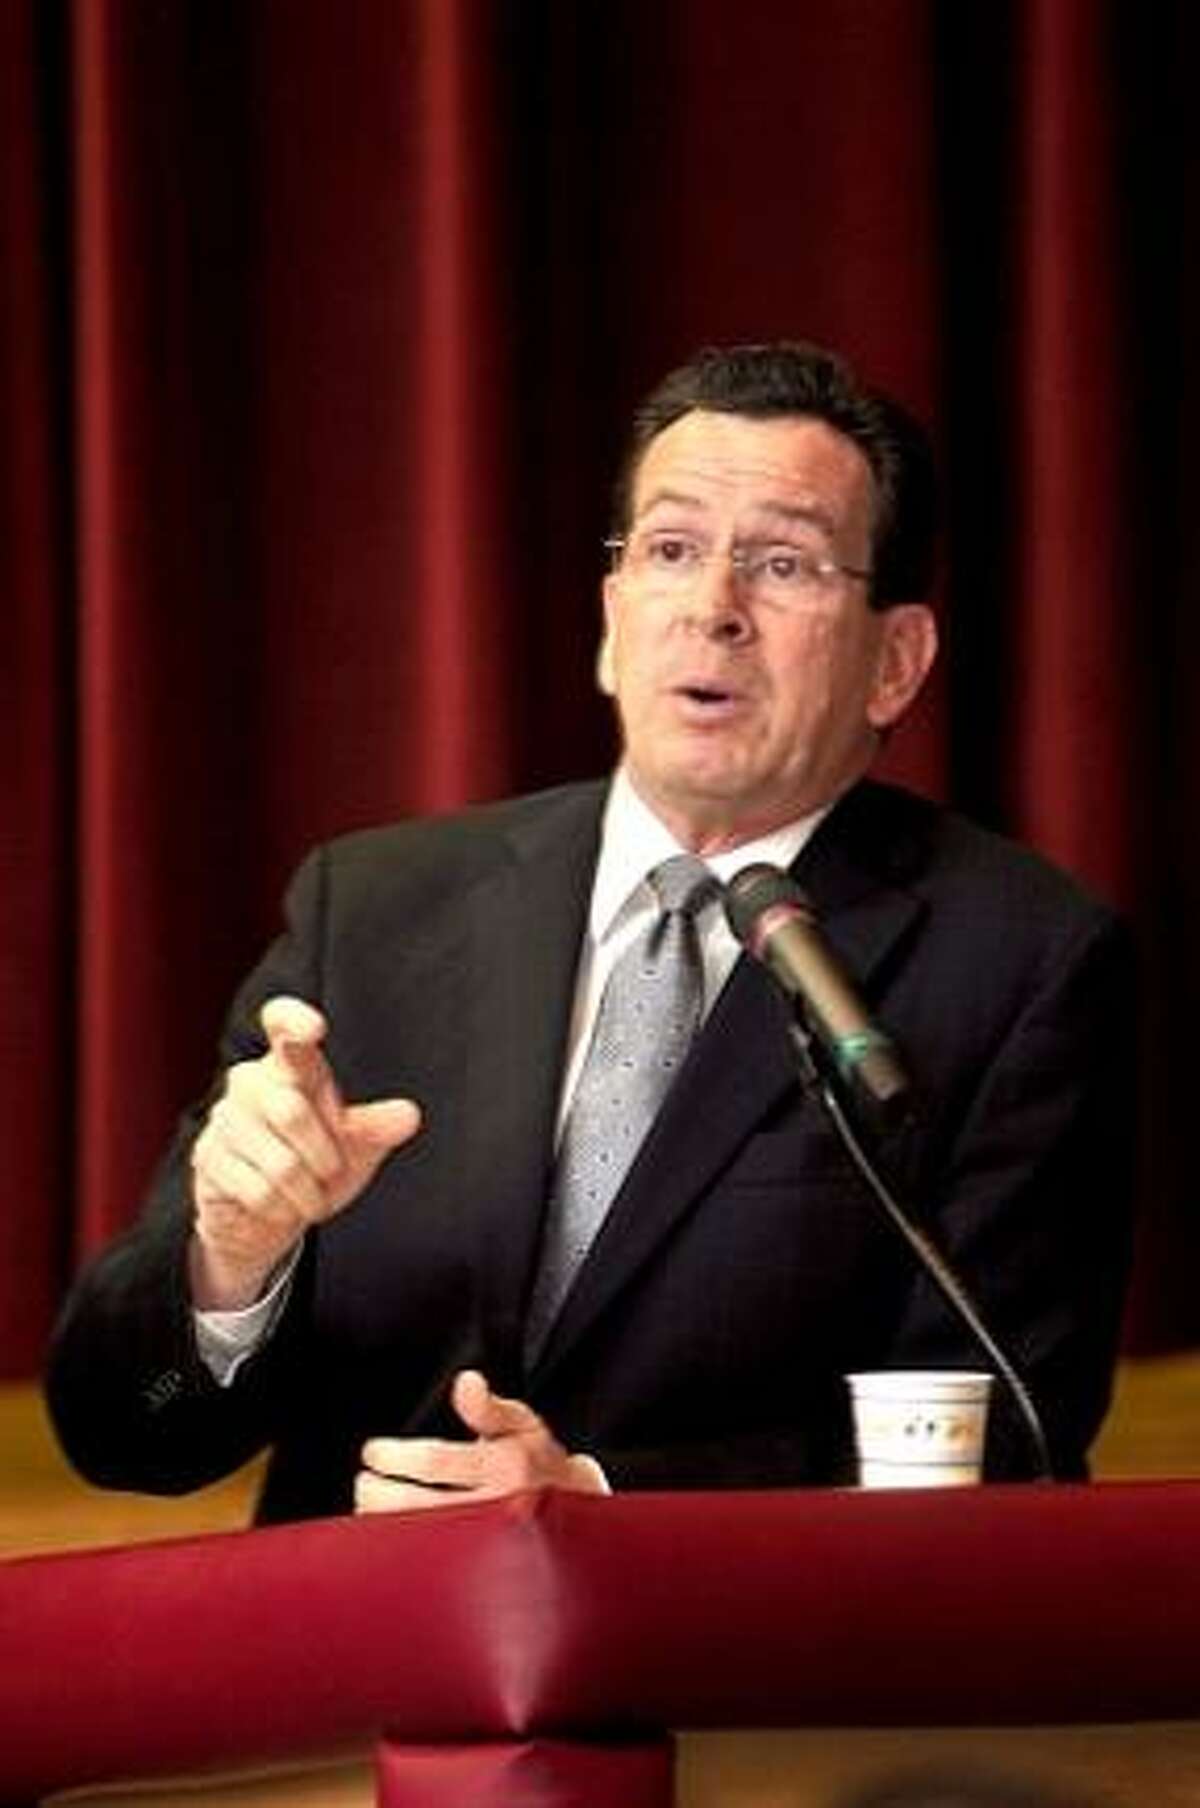 RICK THOMASON / Register Citizen Governor Malloy answers one of the questions from an audience member.